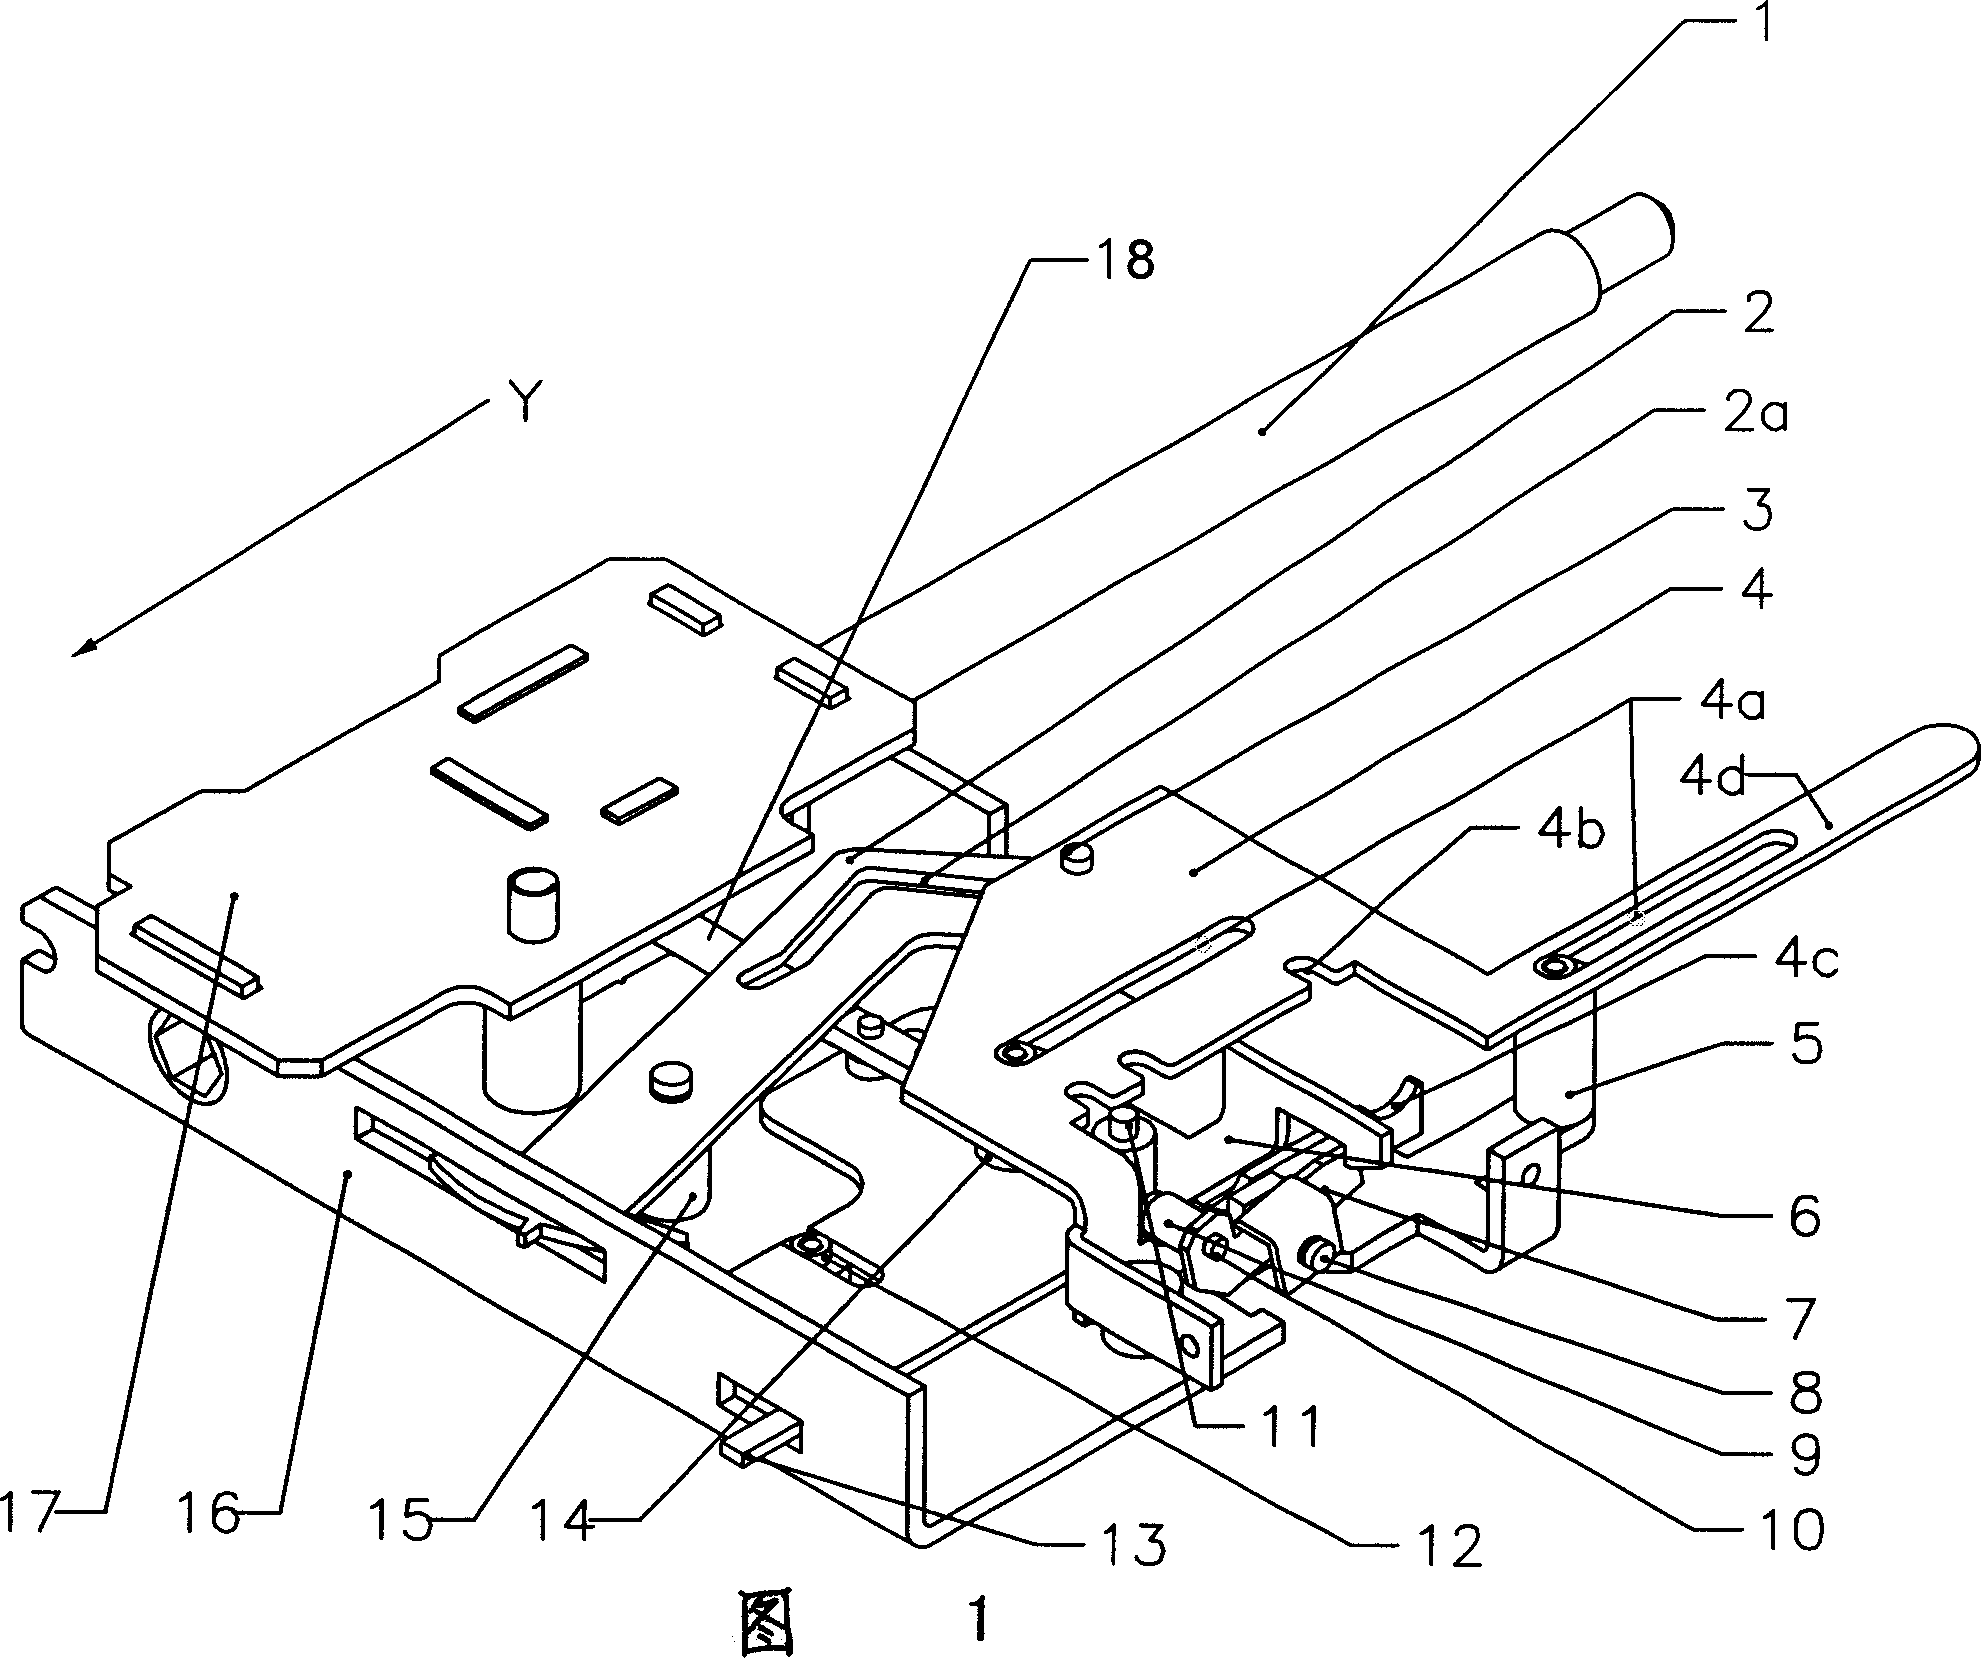 Position indicating and locking device